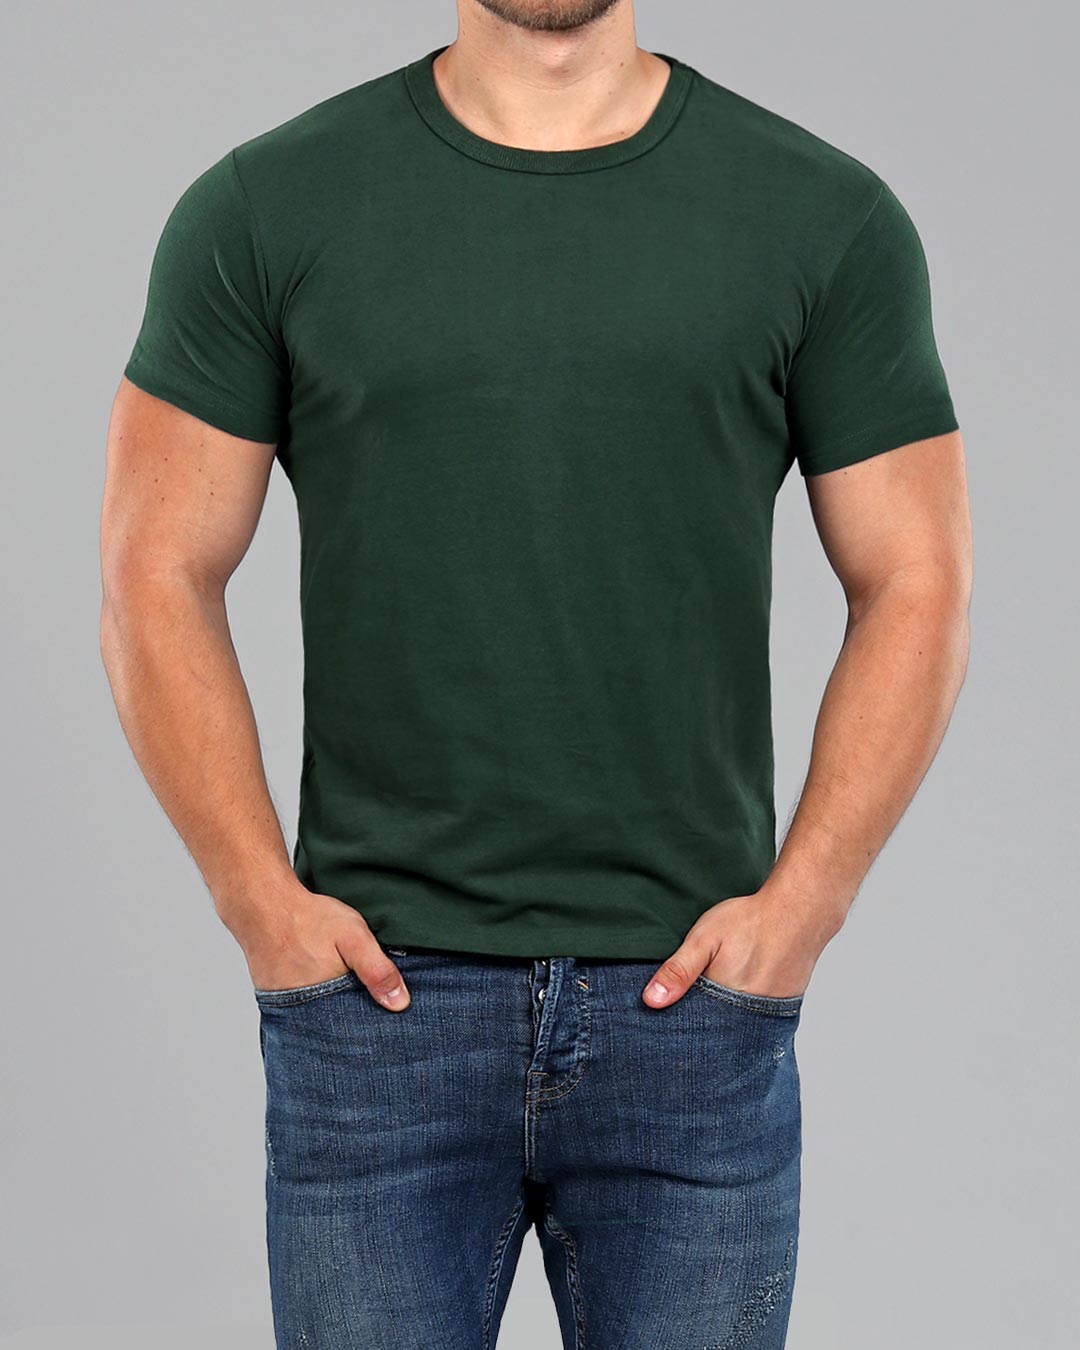 Crew Basic Muscle Fitted Plain T-Shirt - Dark Green